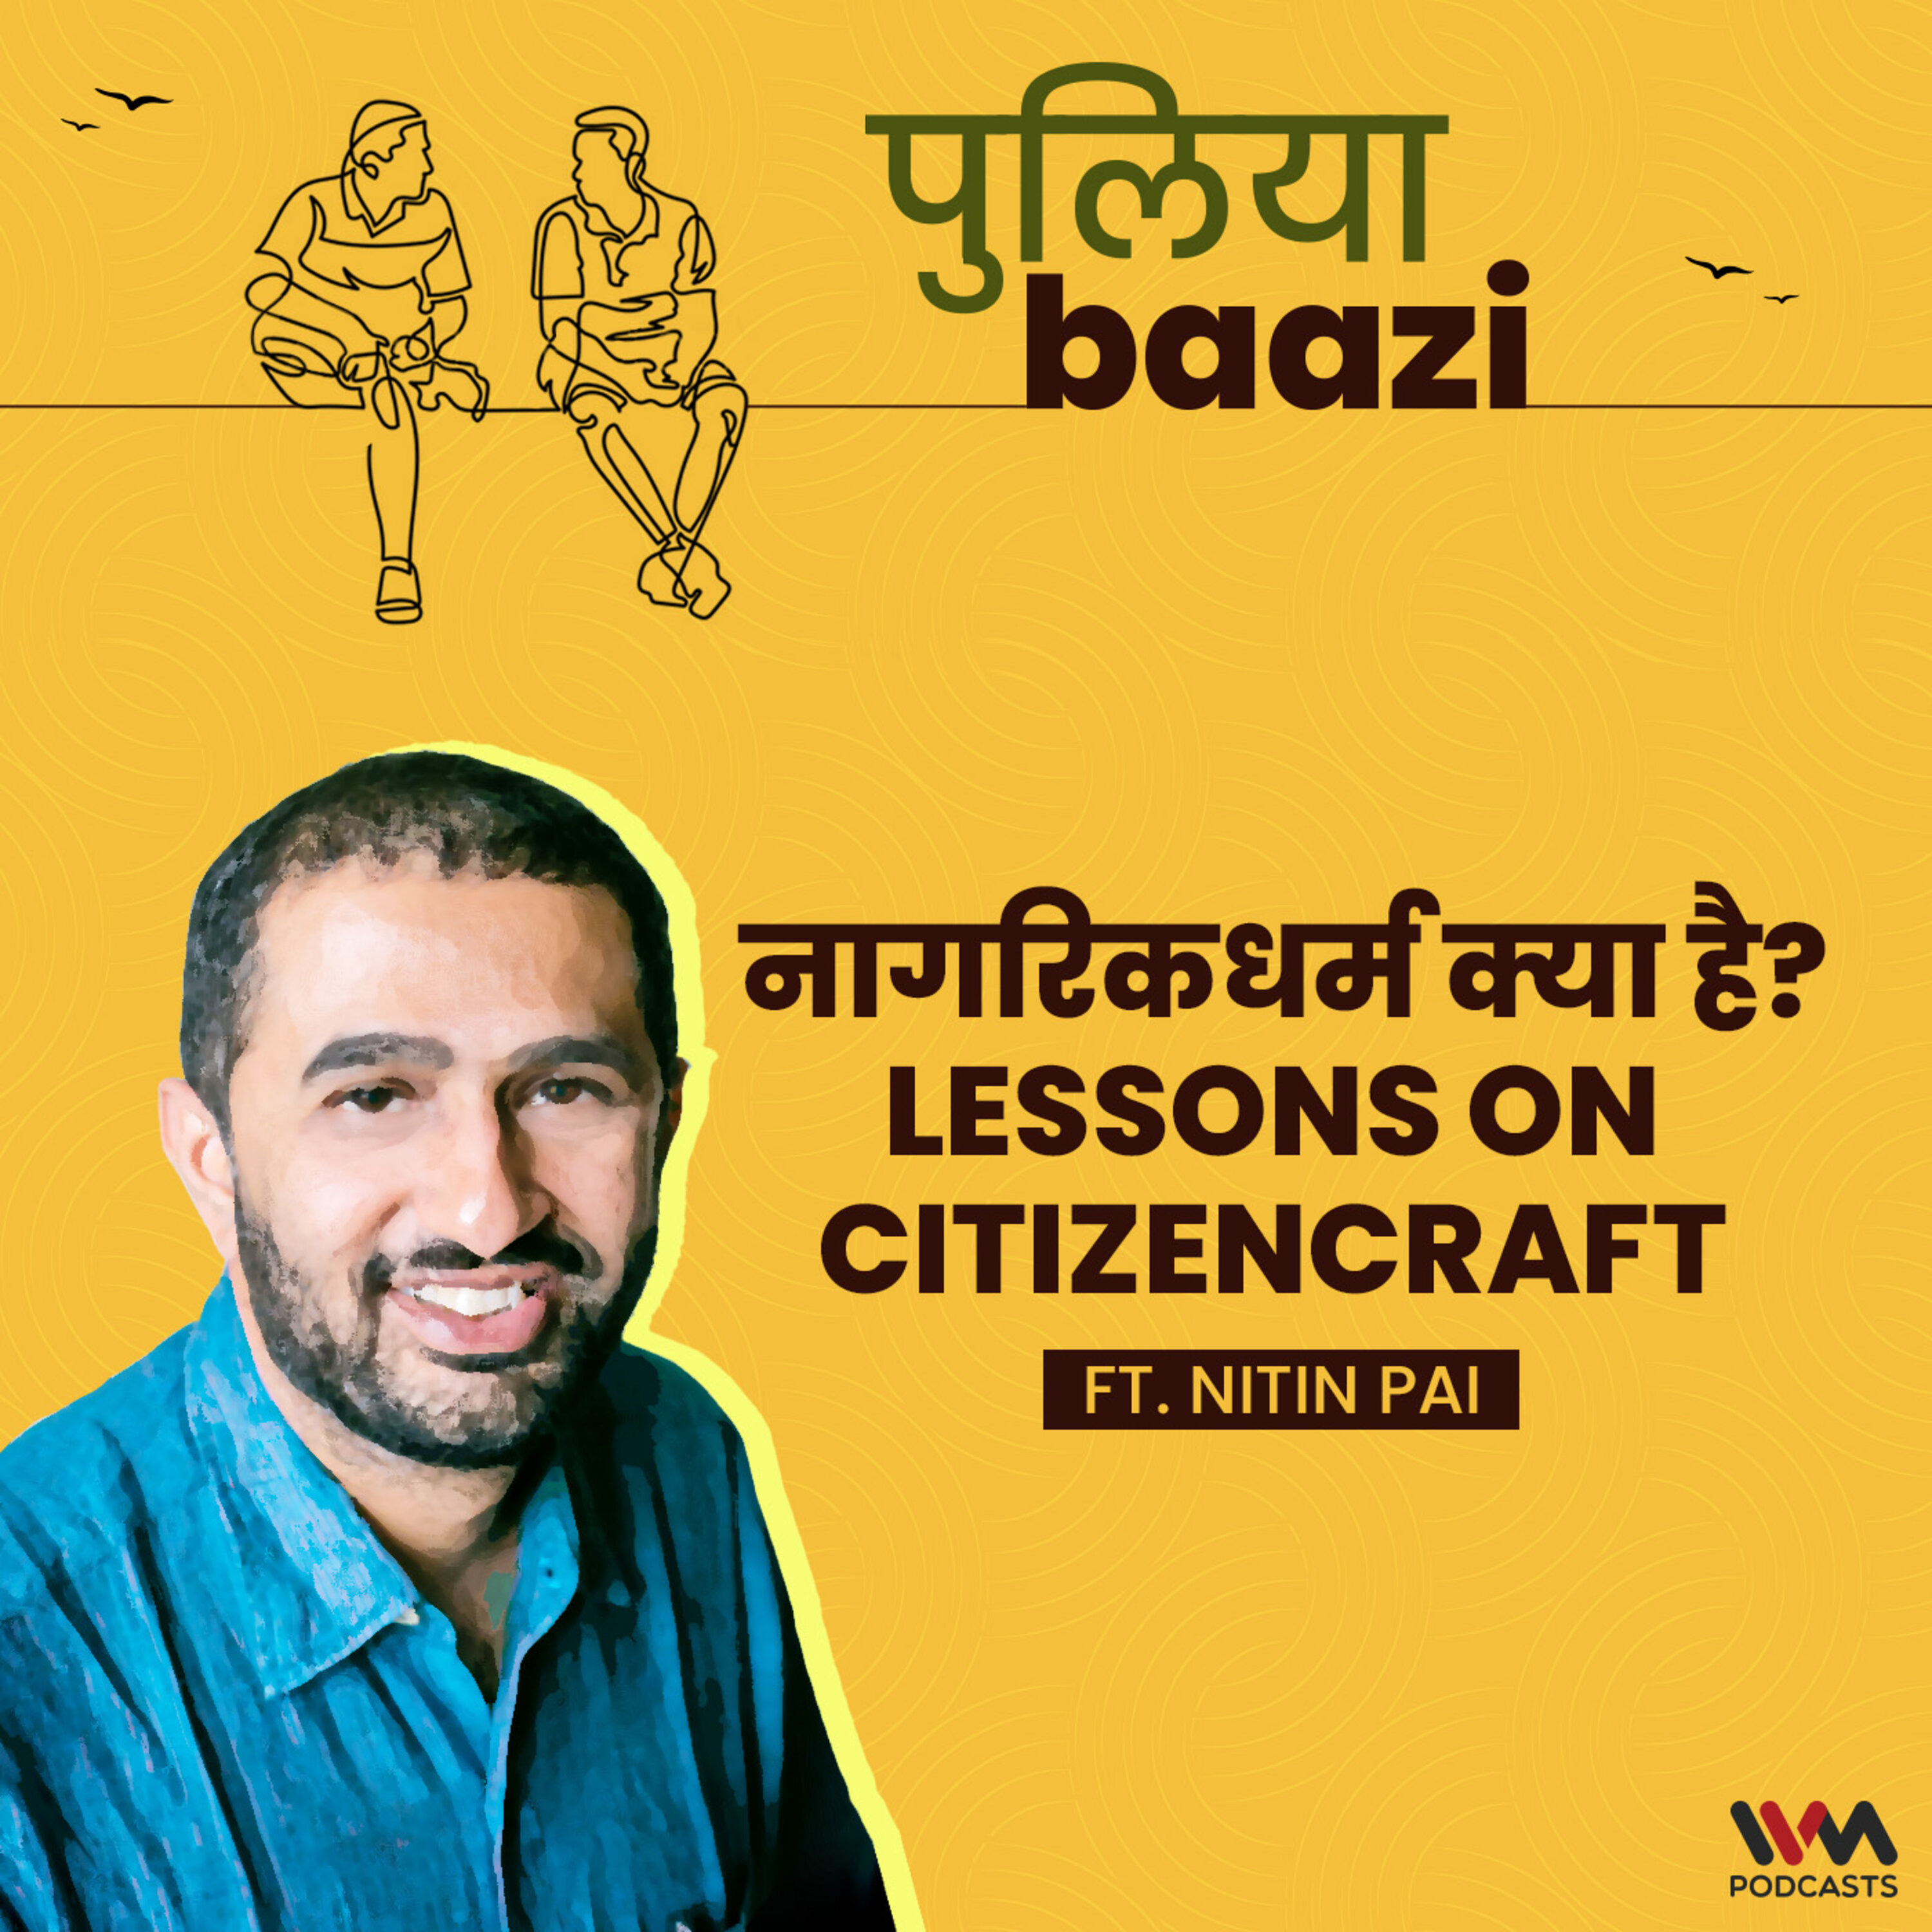 नागरिकधर्म क्या है? Lessons on Citizencraft Ft. Nitin Pai